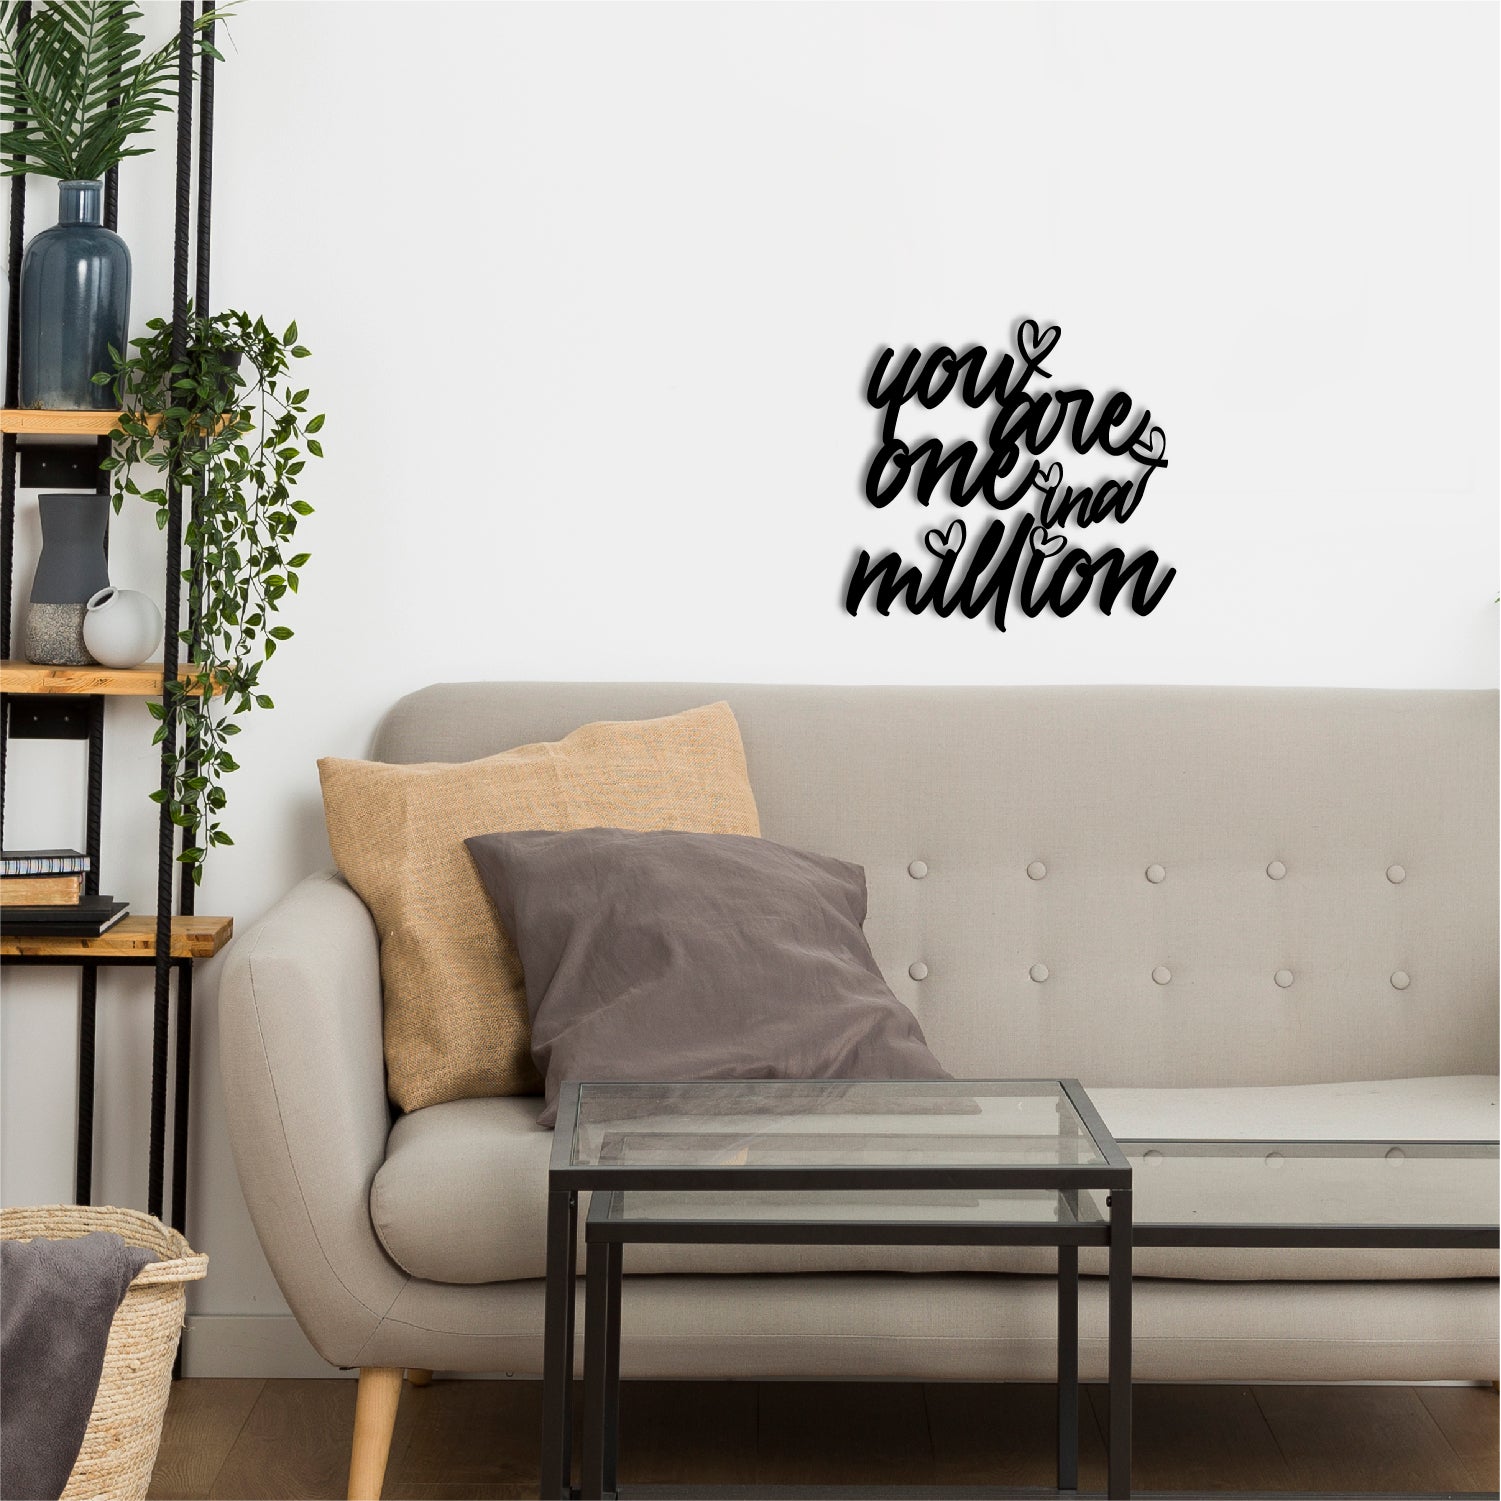 "You Are One In A Million" Love Theme Black Engineered Wood Wall Art Cutout, Ready to Hang Home Decor 1